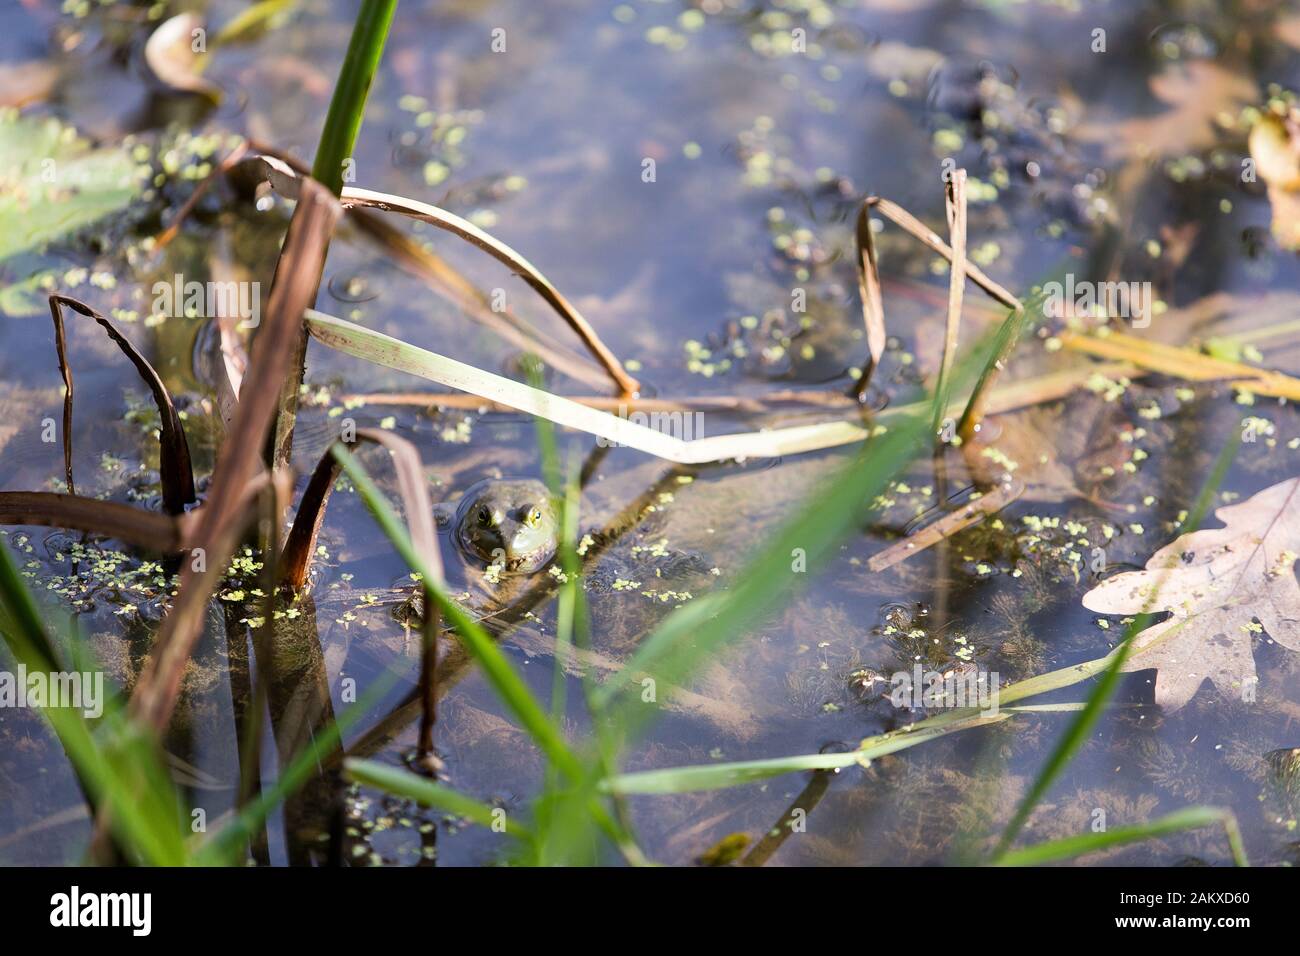 Bullfrog peaks out of pond Stock Photo